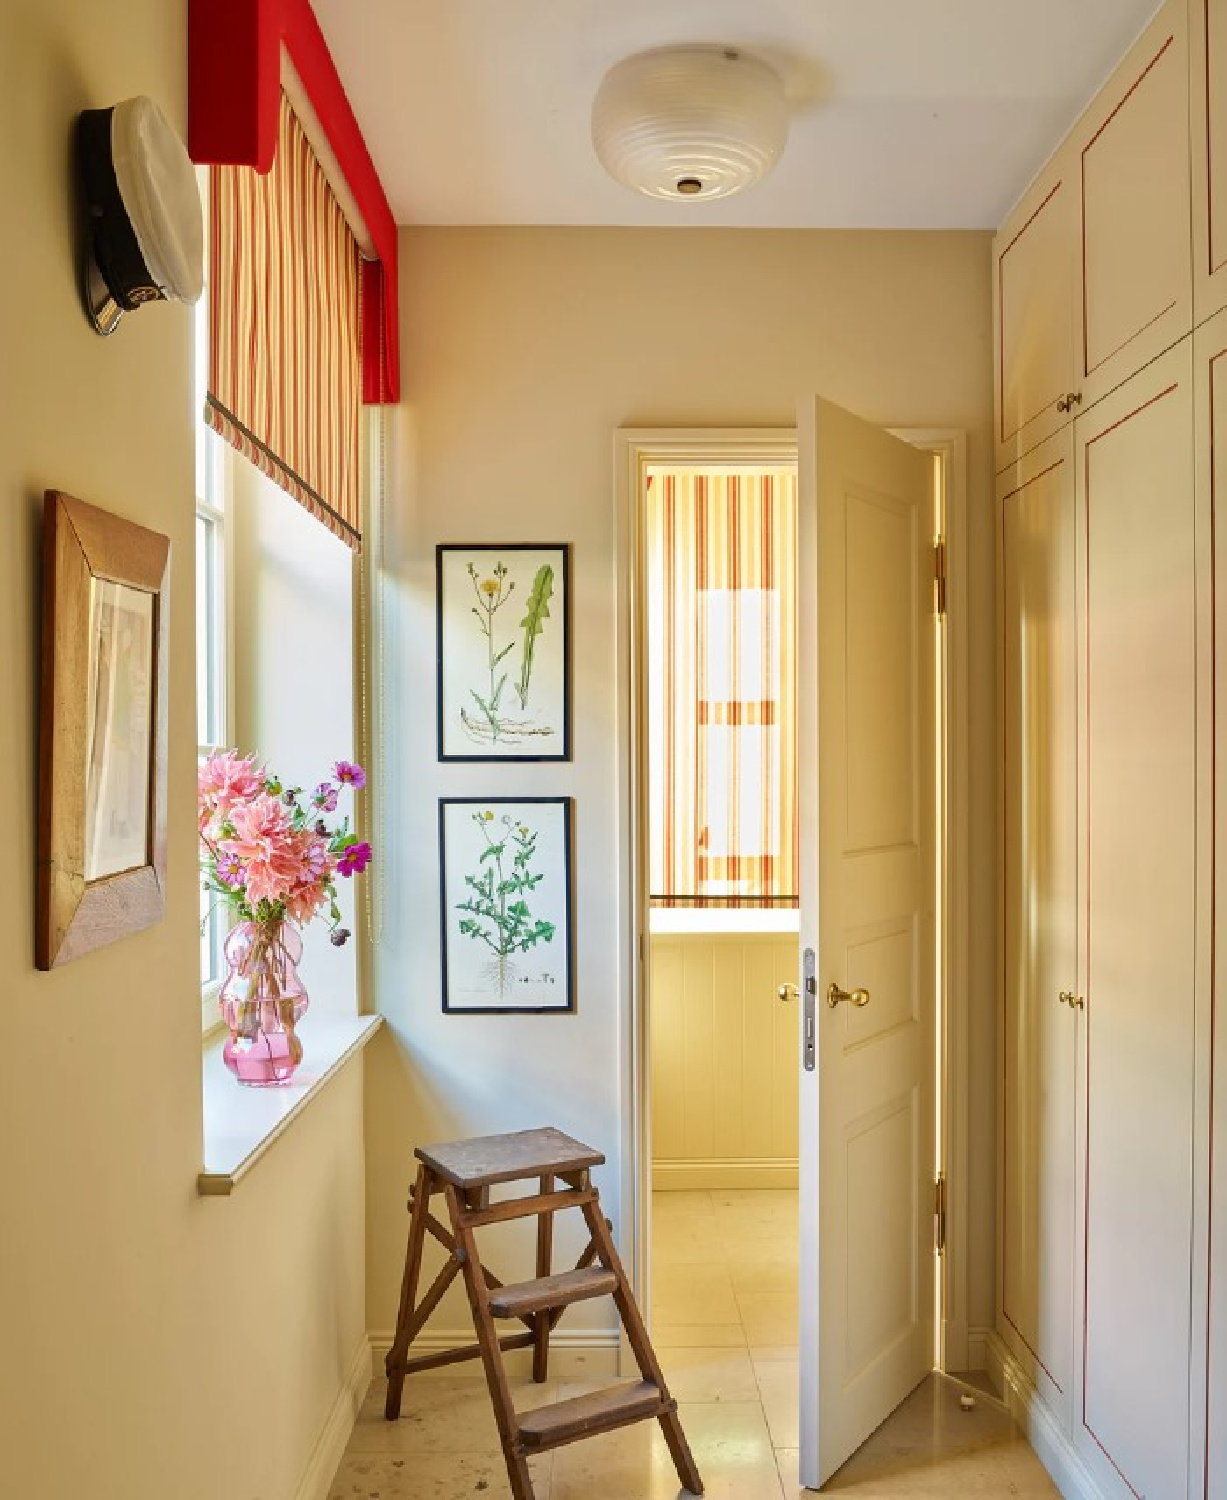 Cheery and sunny hall with window - Beata Heuman - photo by Robert Reiger.